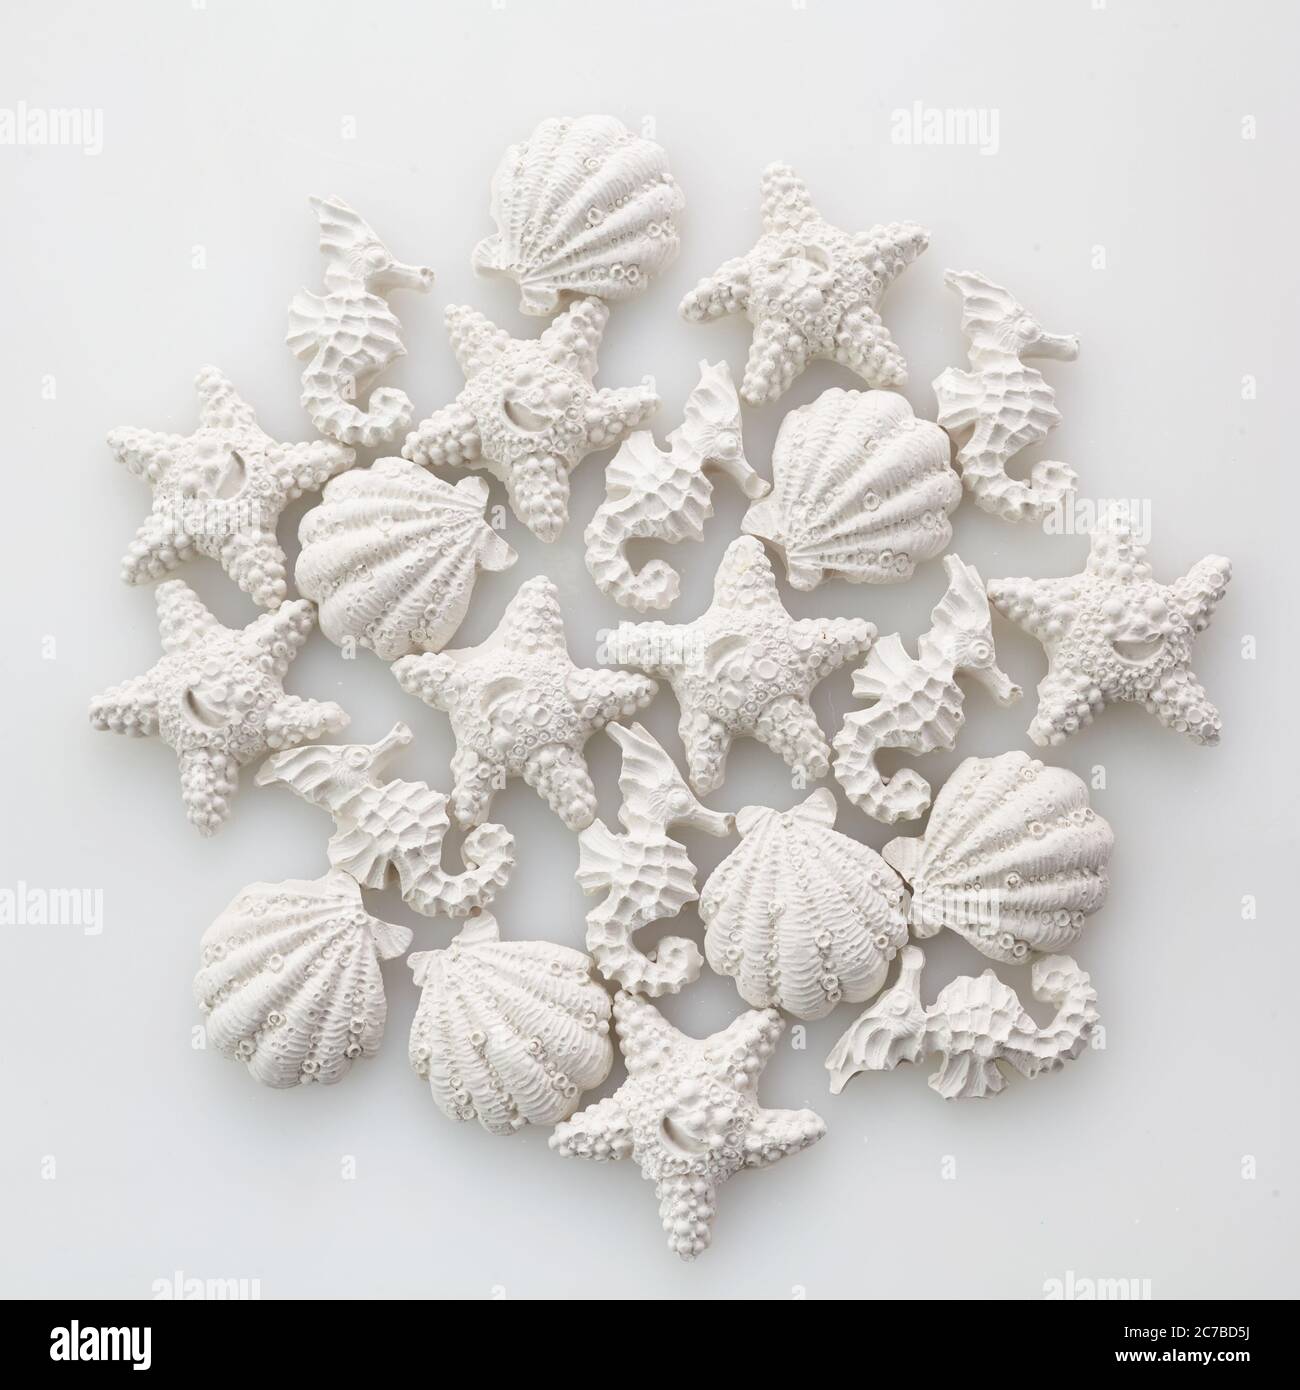 Marine ocean day background with shells starfishes and seahorses. white on white concept Stock Photo